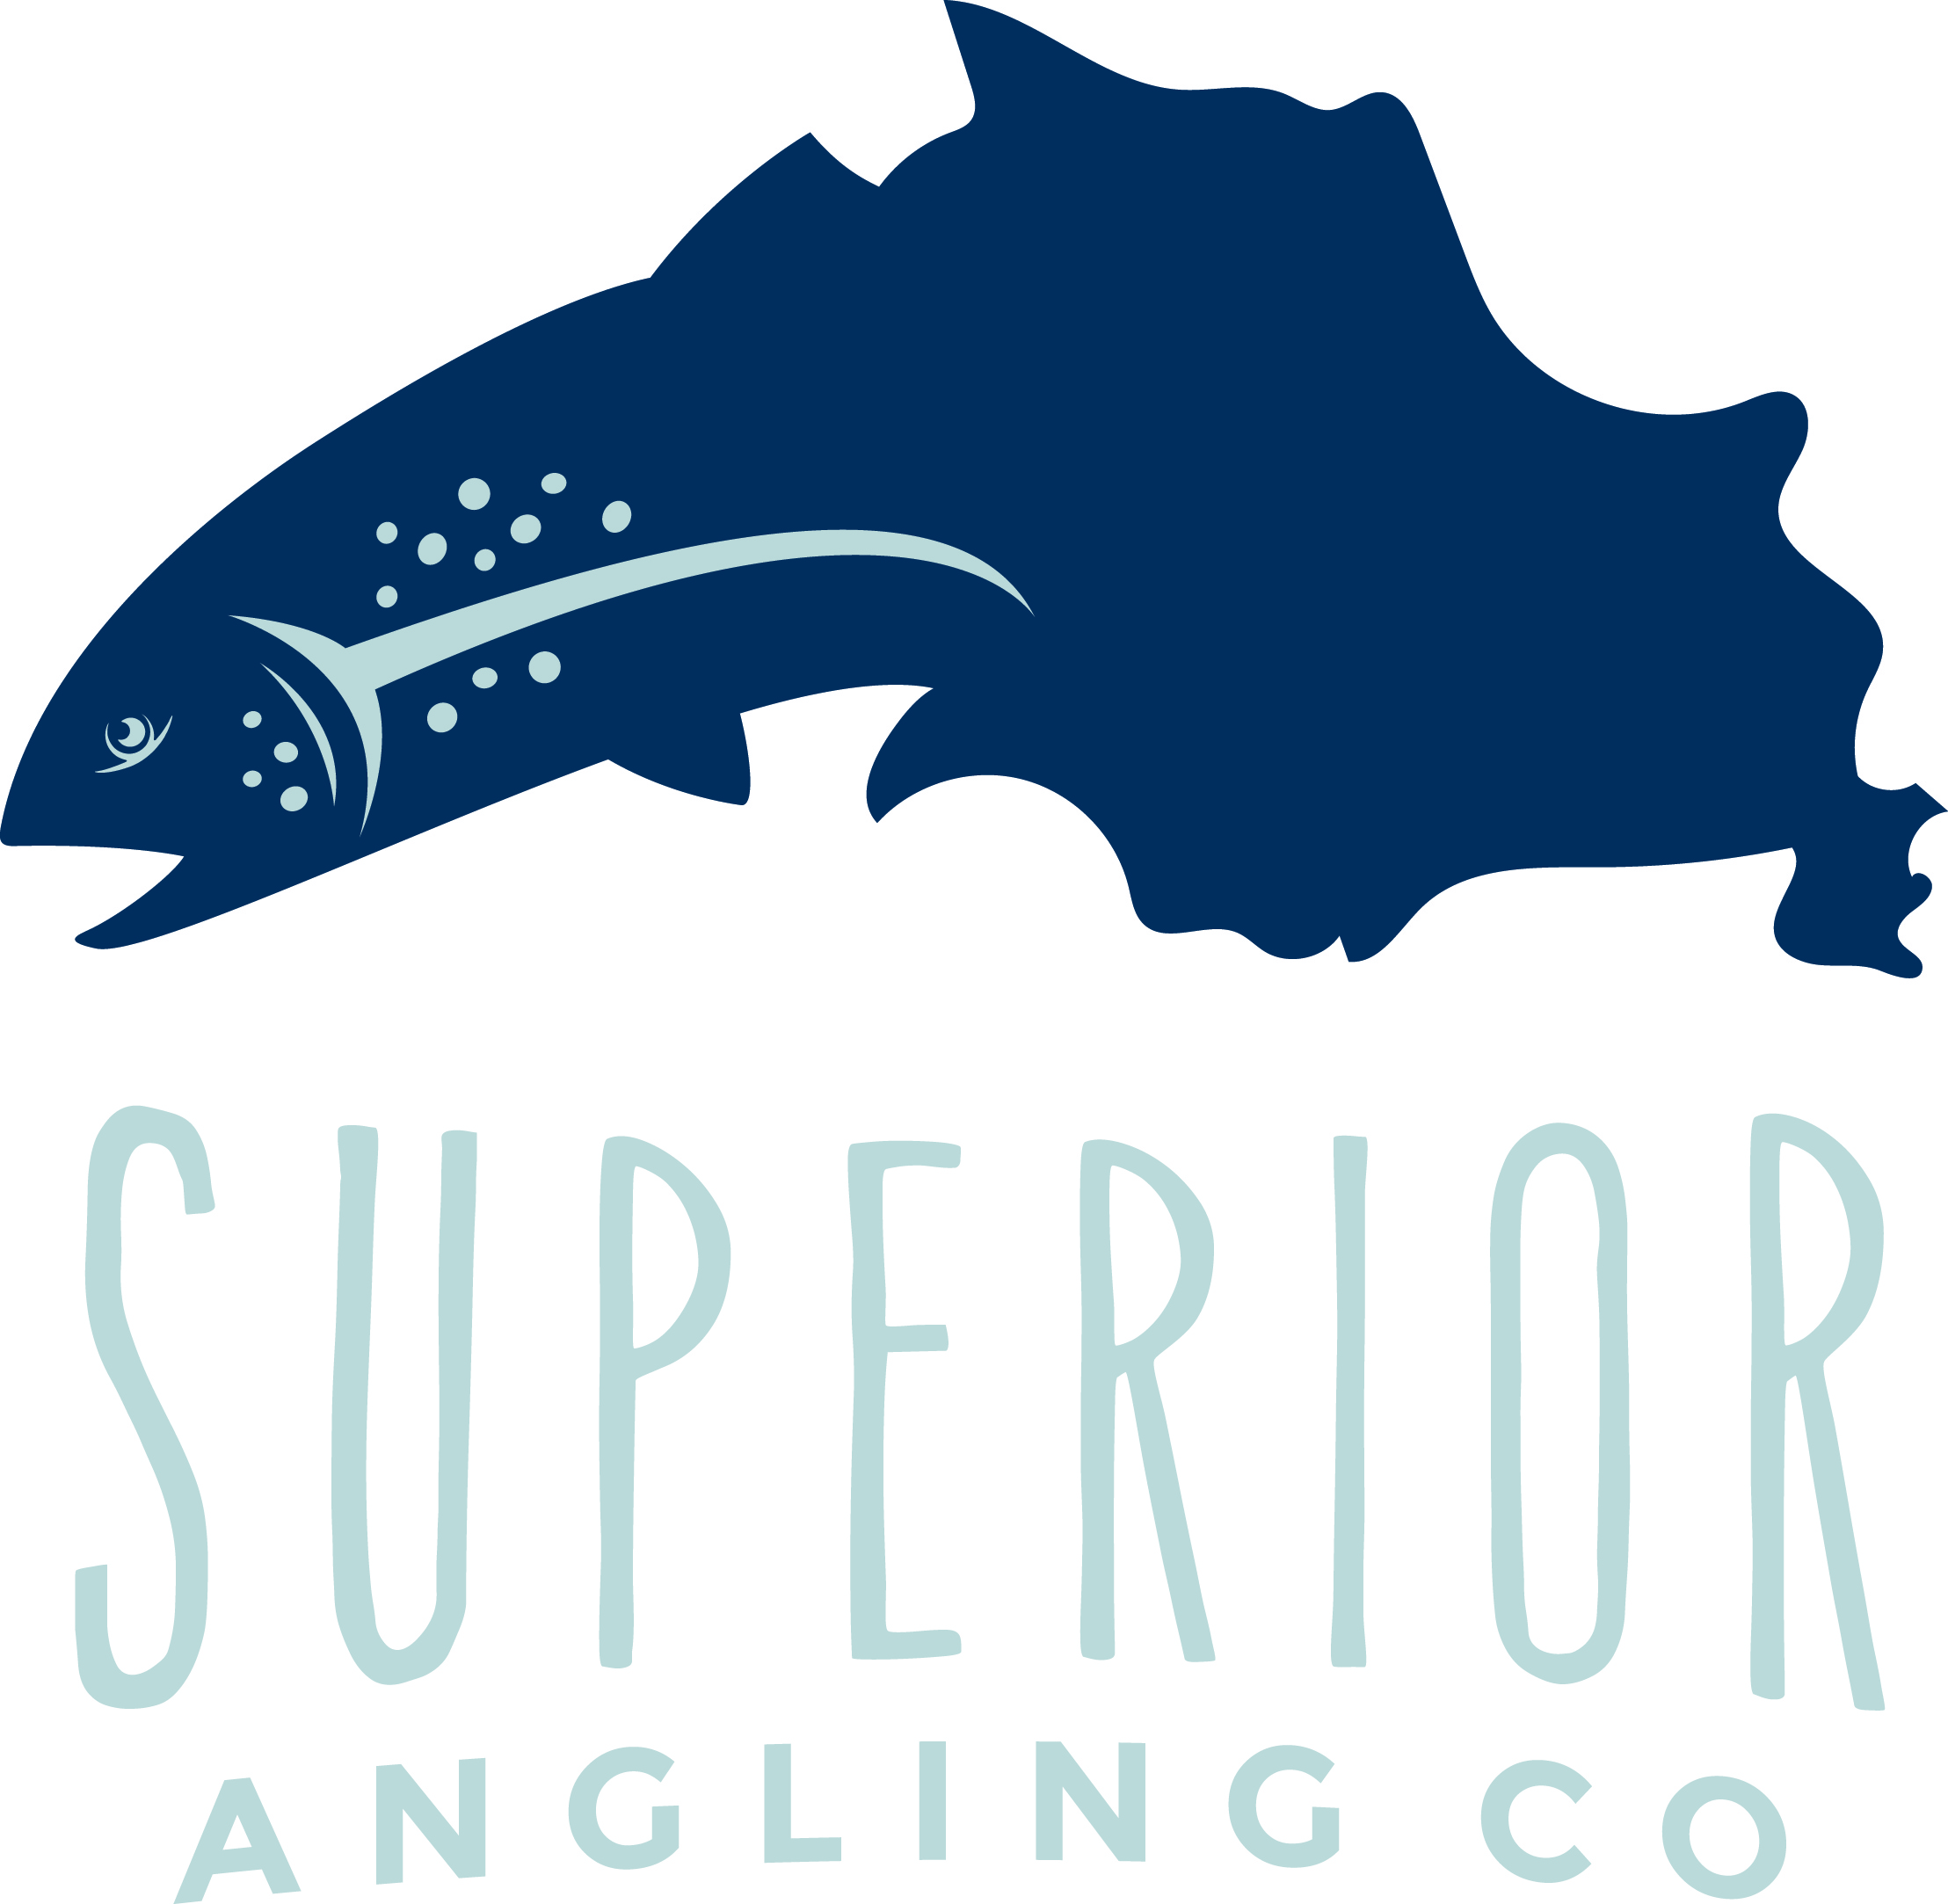 Superior Angling co